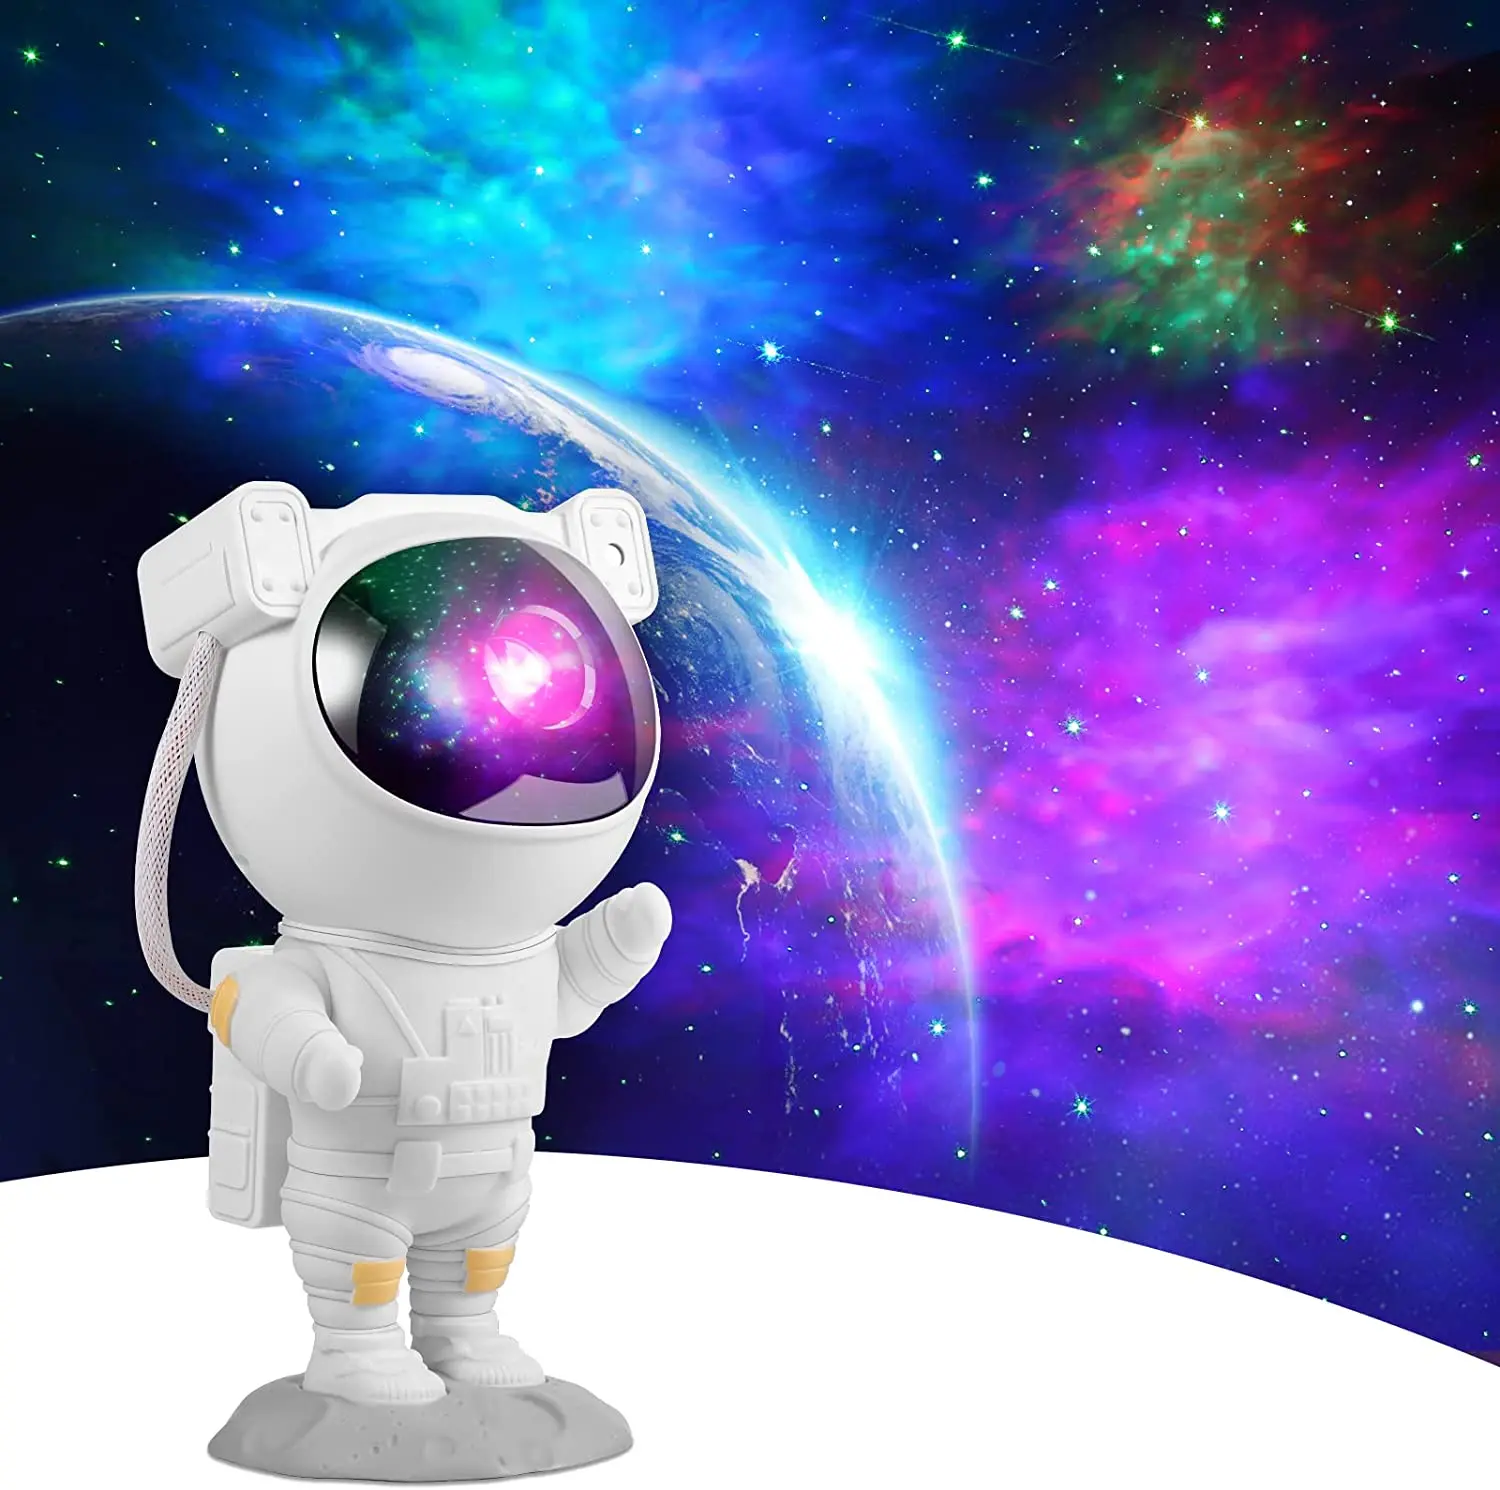 Novelty Astronaut LED Night Light Galaxy Starry Star Projector Lamp Kids Bedroom Projection Lamp Home Decorative Lighting Gifts